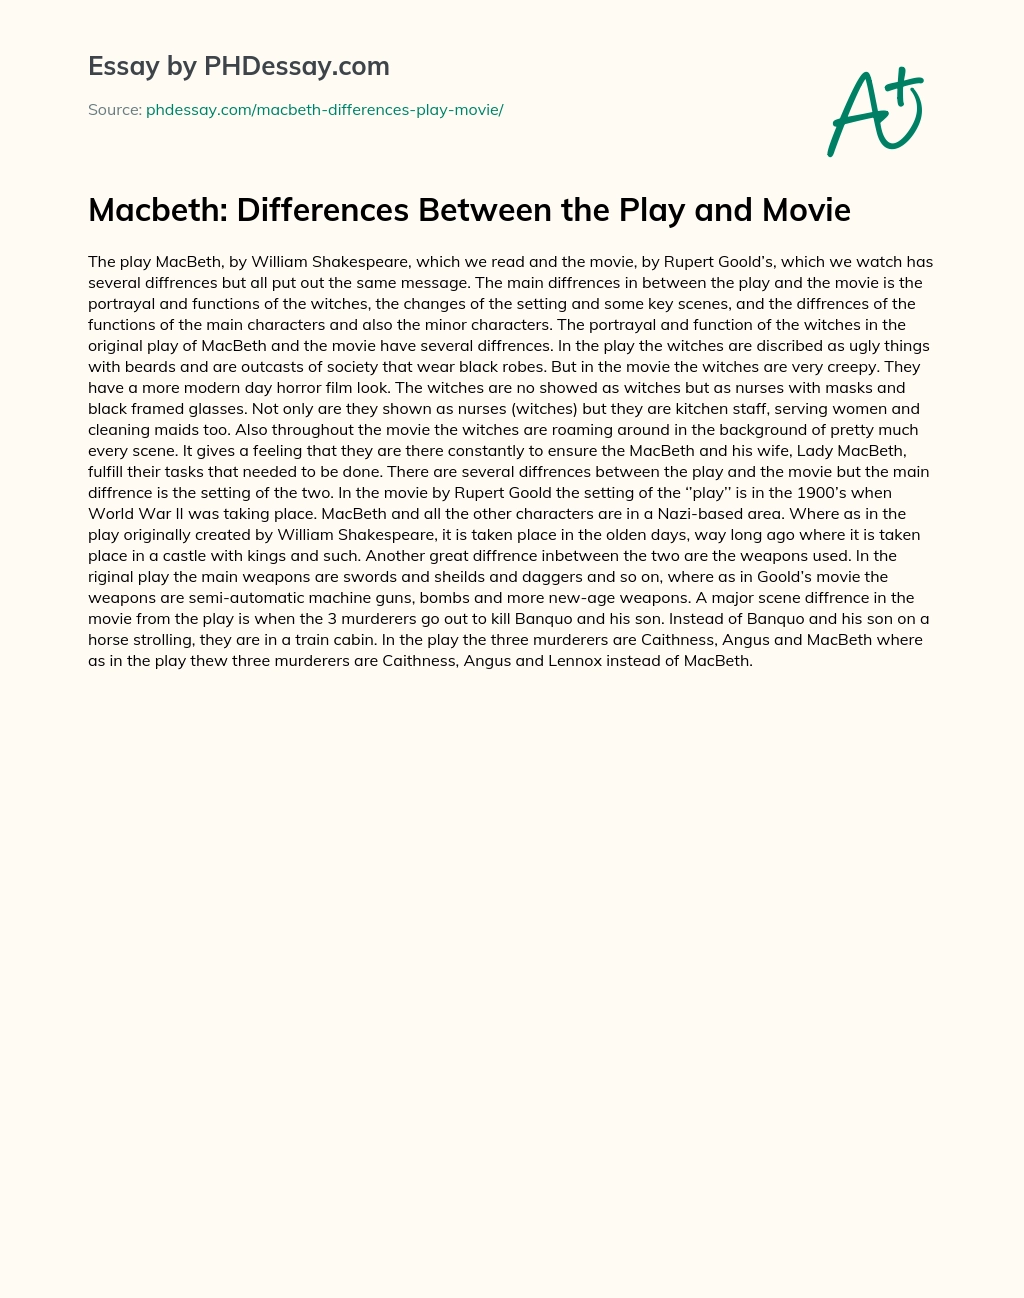 Macbeth: Differences Between the Play and Movie essay